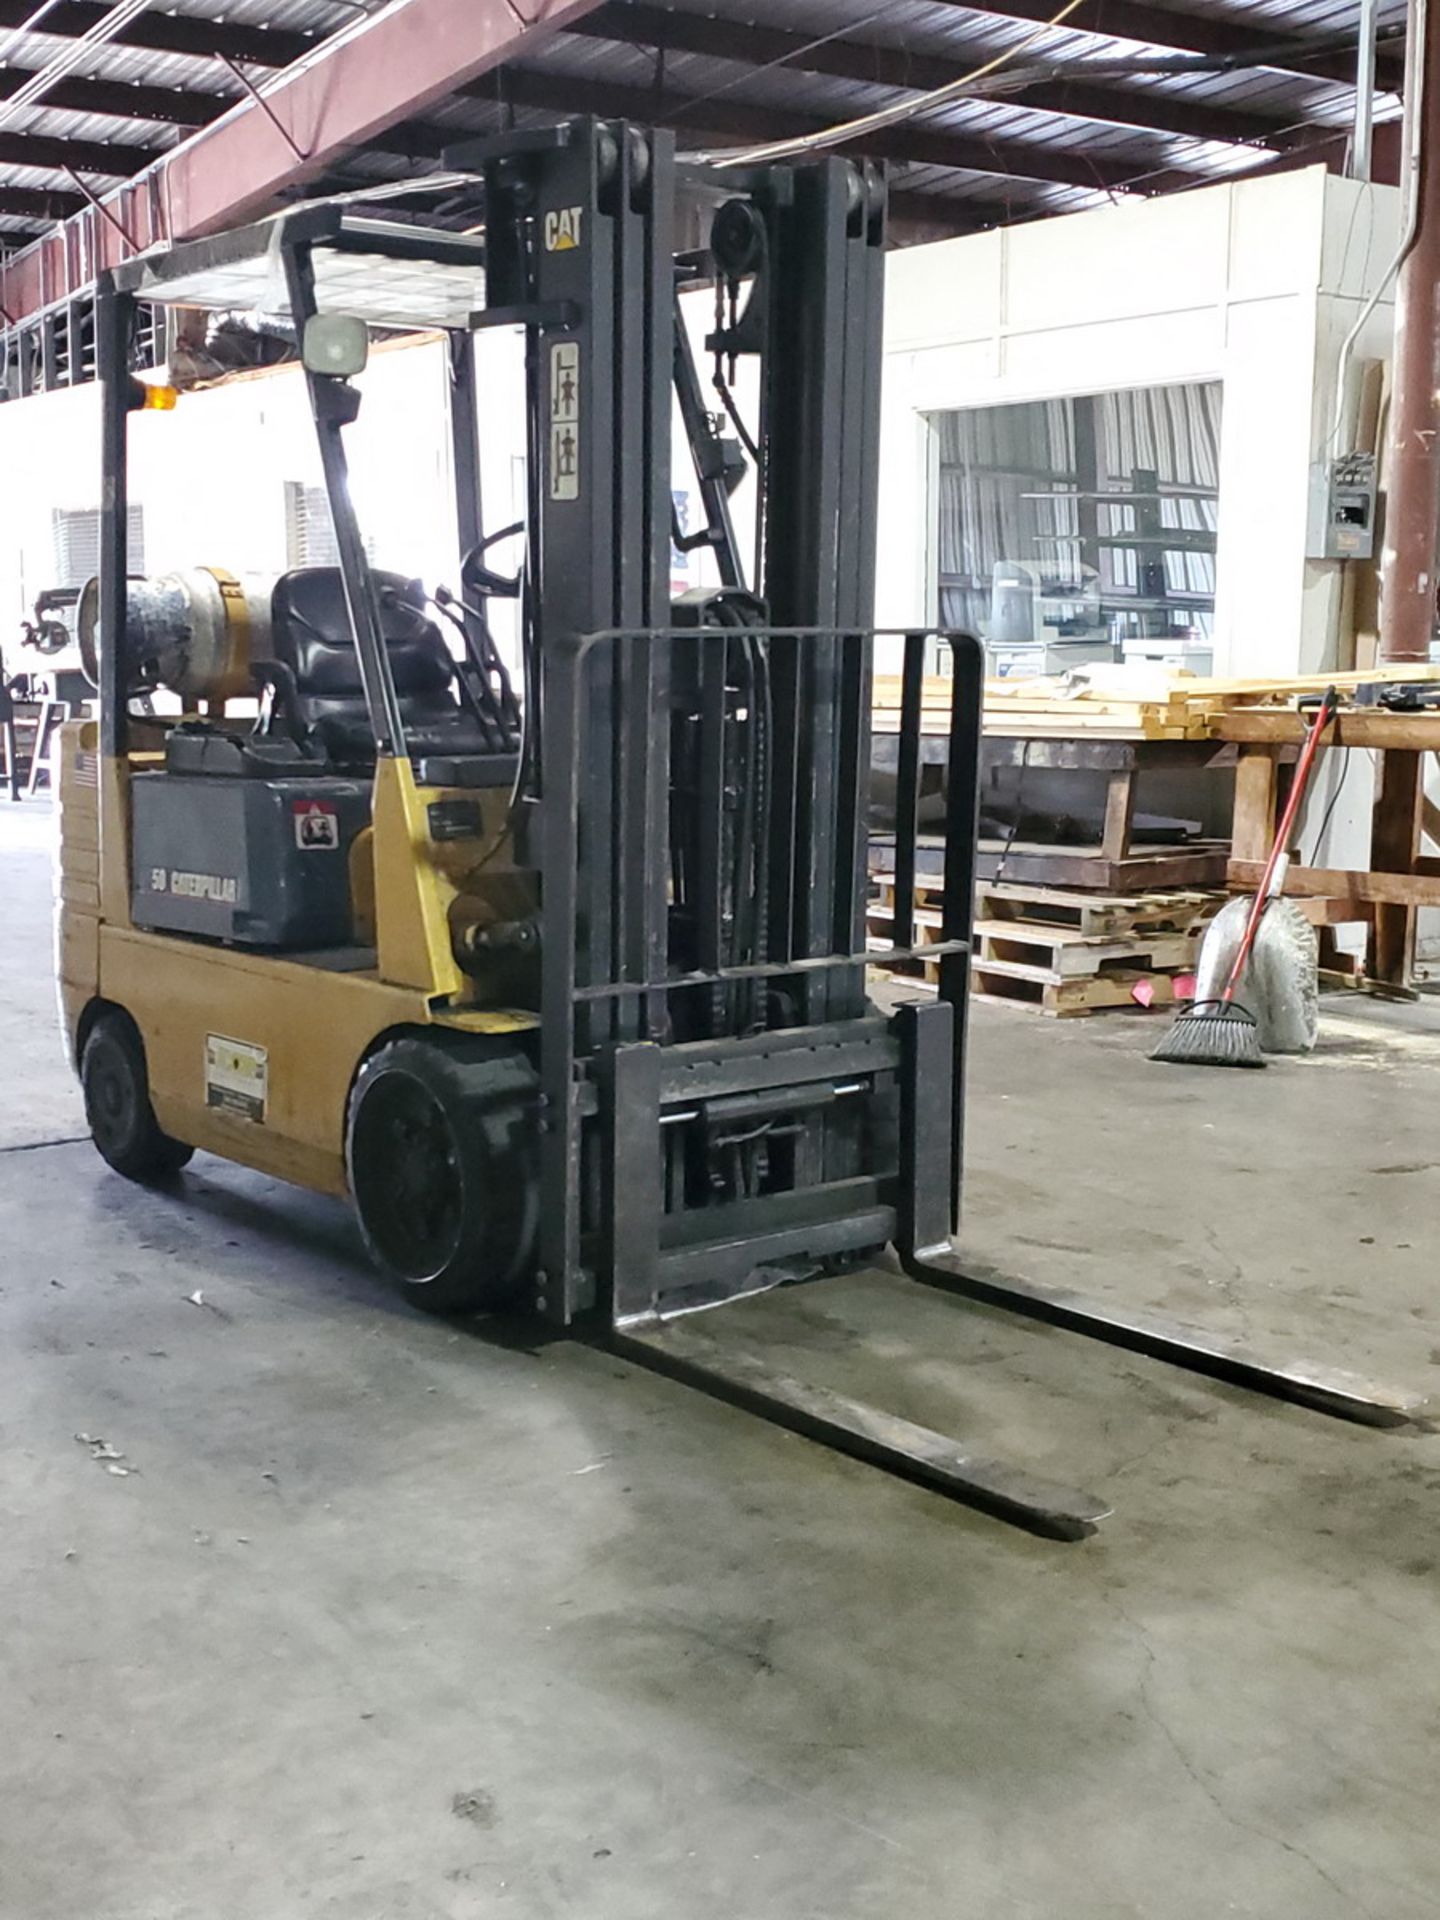 CAT GC25 LP Forklift 4,350Cap., 3-Stage Mast, 42" Forks, 5,374hrs, 190" Lift Height - Image 2 of 11